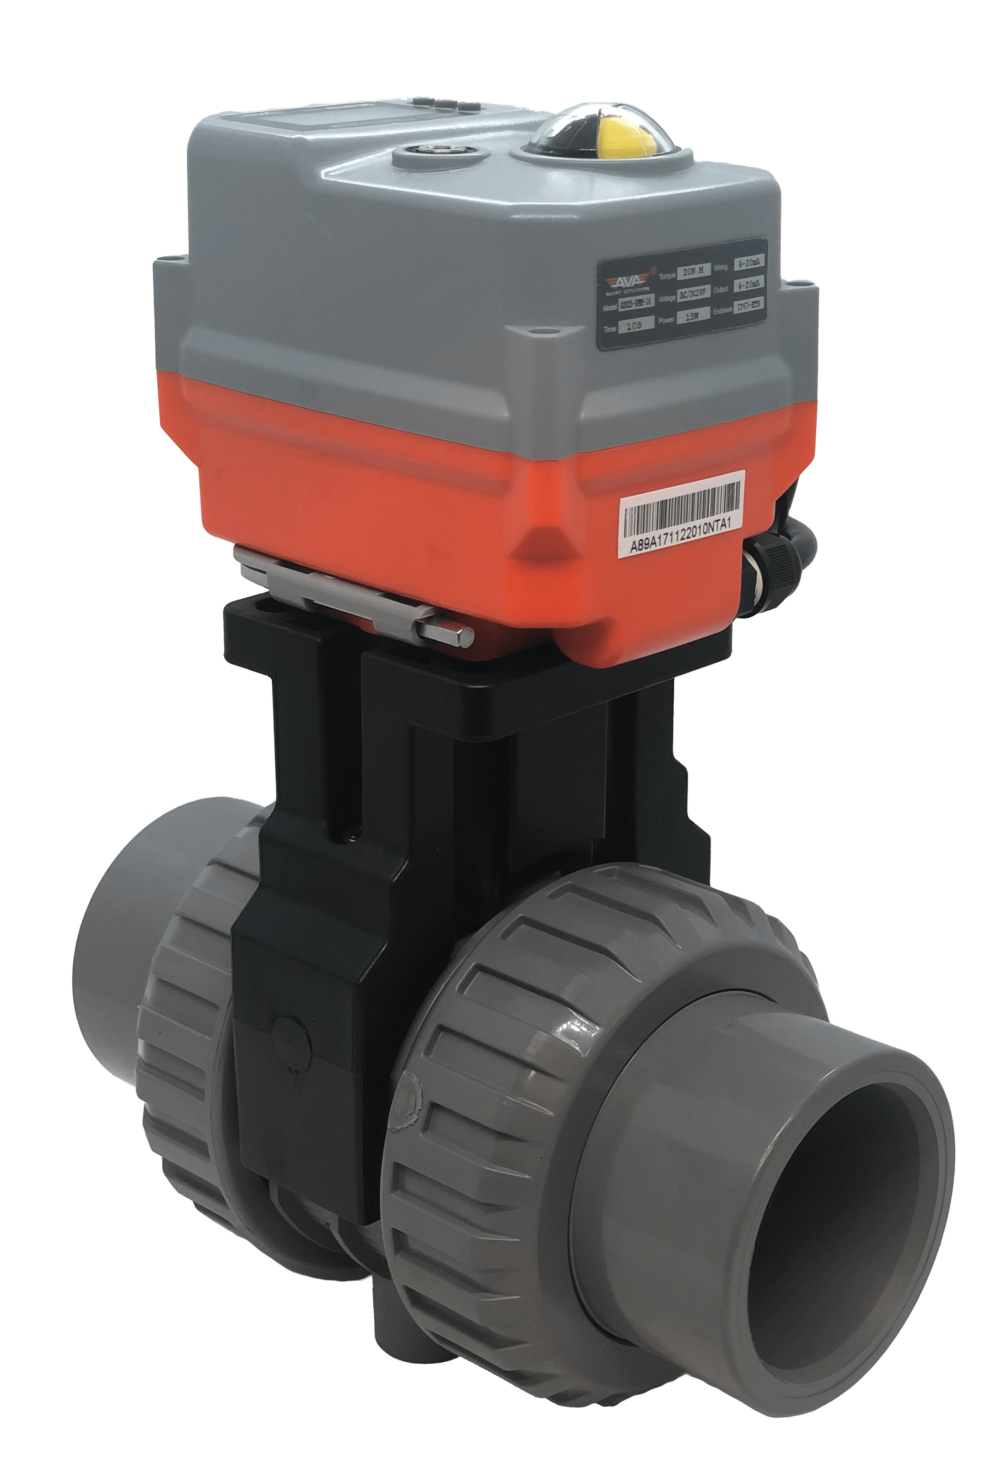 Cepex Extreme Motorised PVC Ball Valve with AVA Electric Actuator from AVS